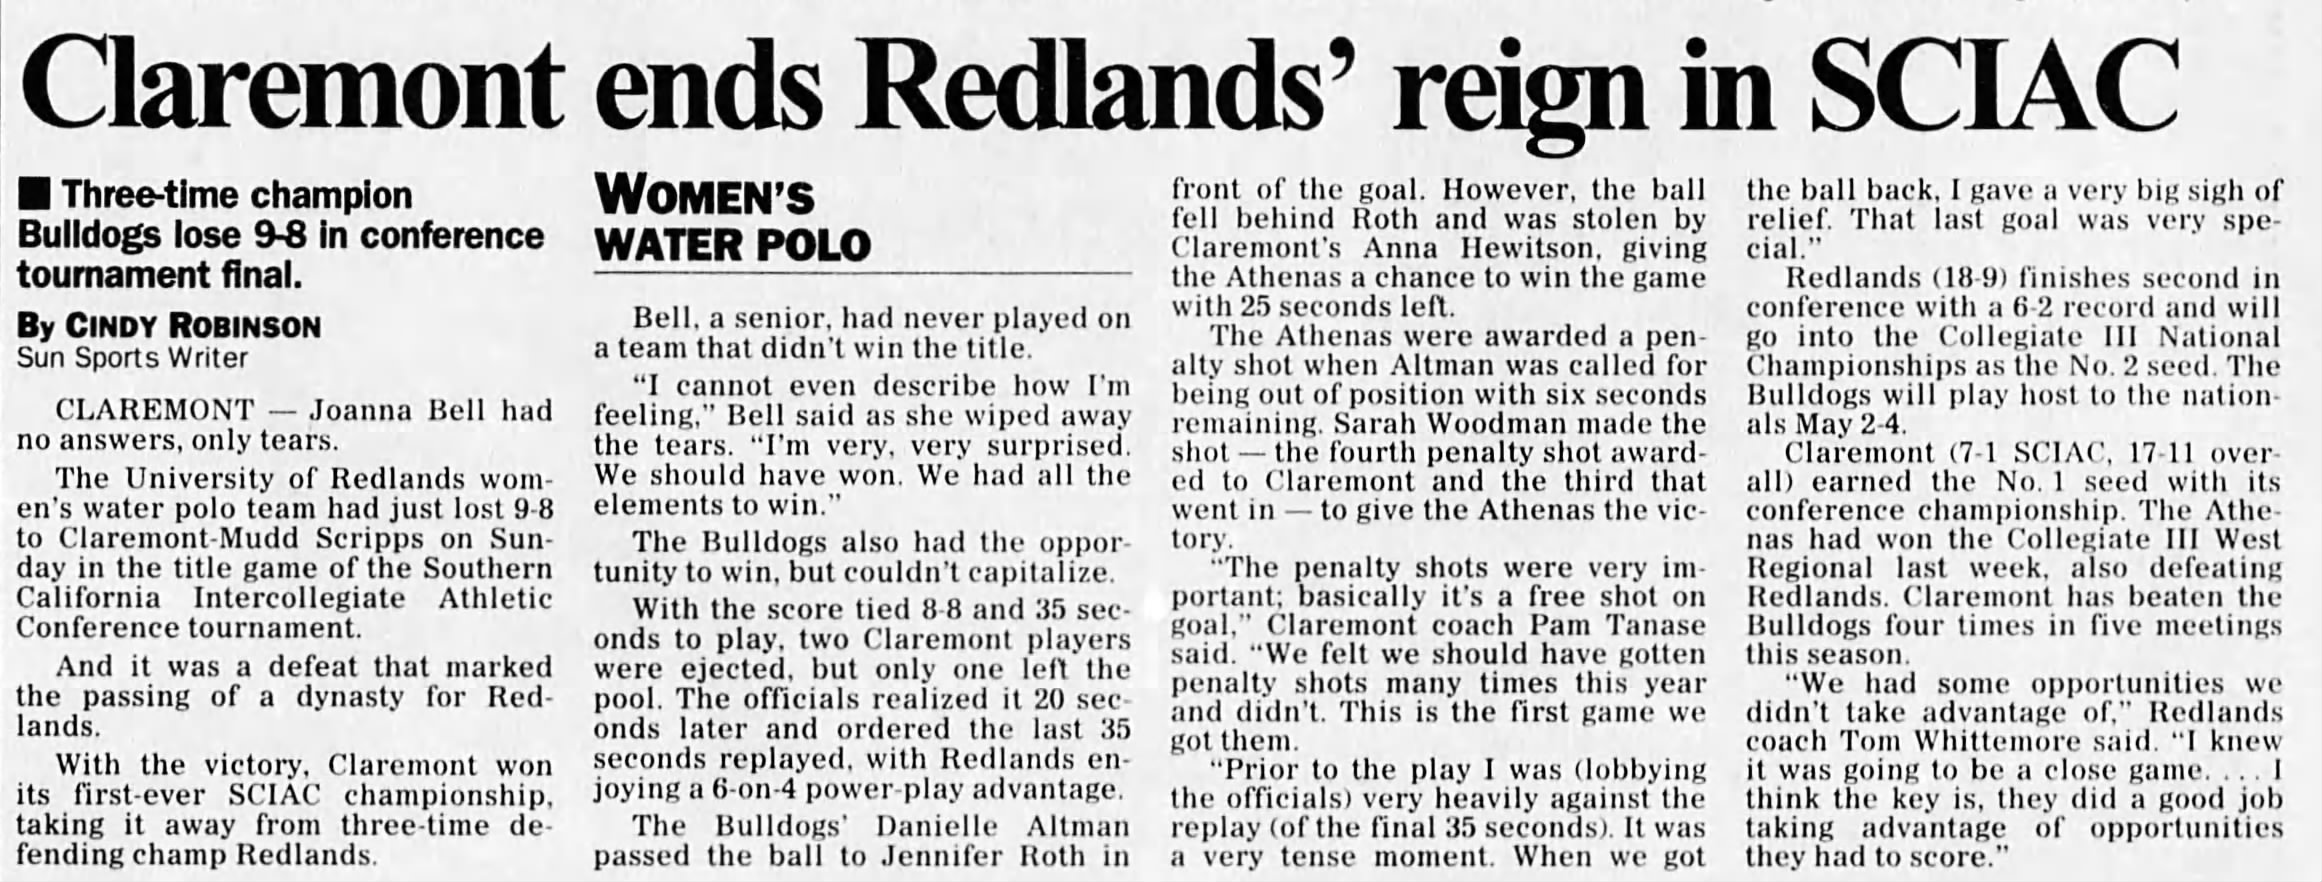 Newspaper clipping with headline "Claremont ends Redlands Reign in SCIAC" - for decorative purposes